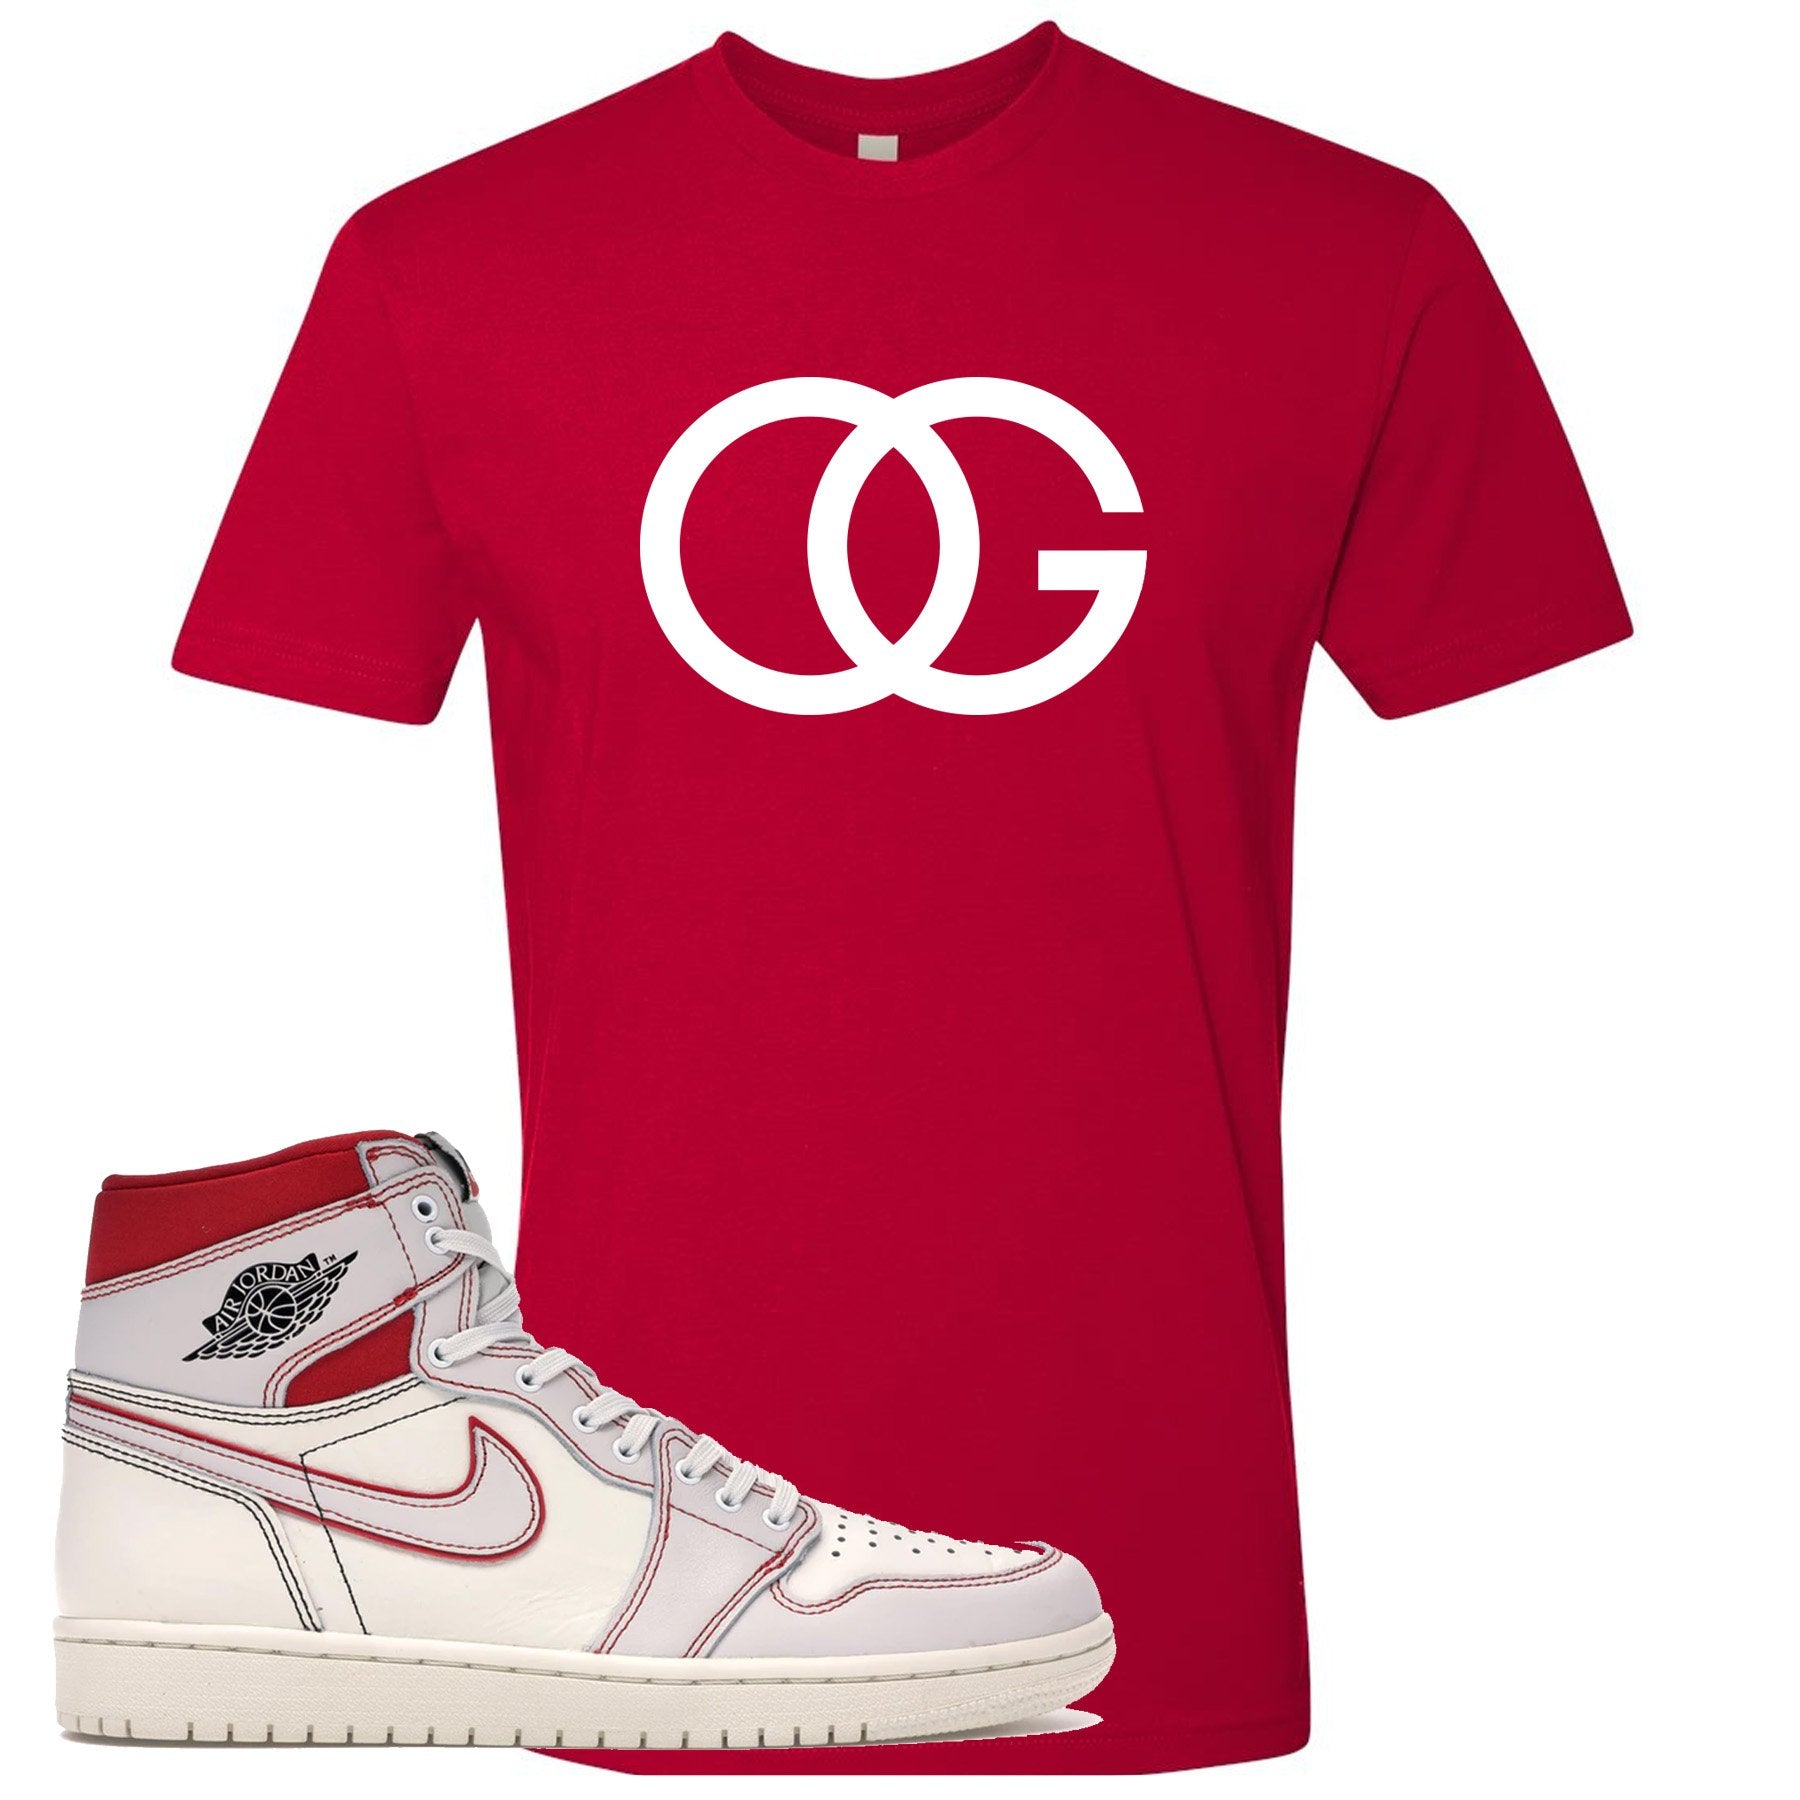 Red and white t-shirt to match the white and red High Retro Jordan 1 shoe